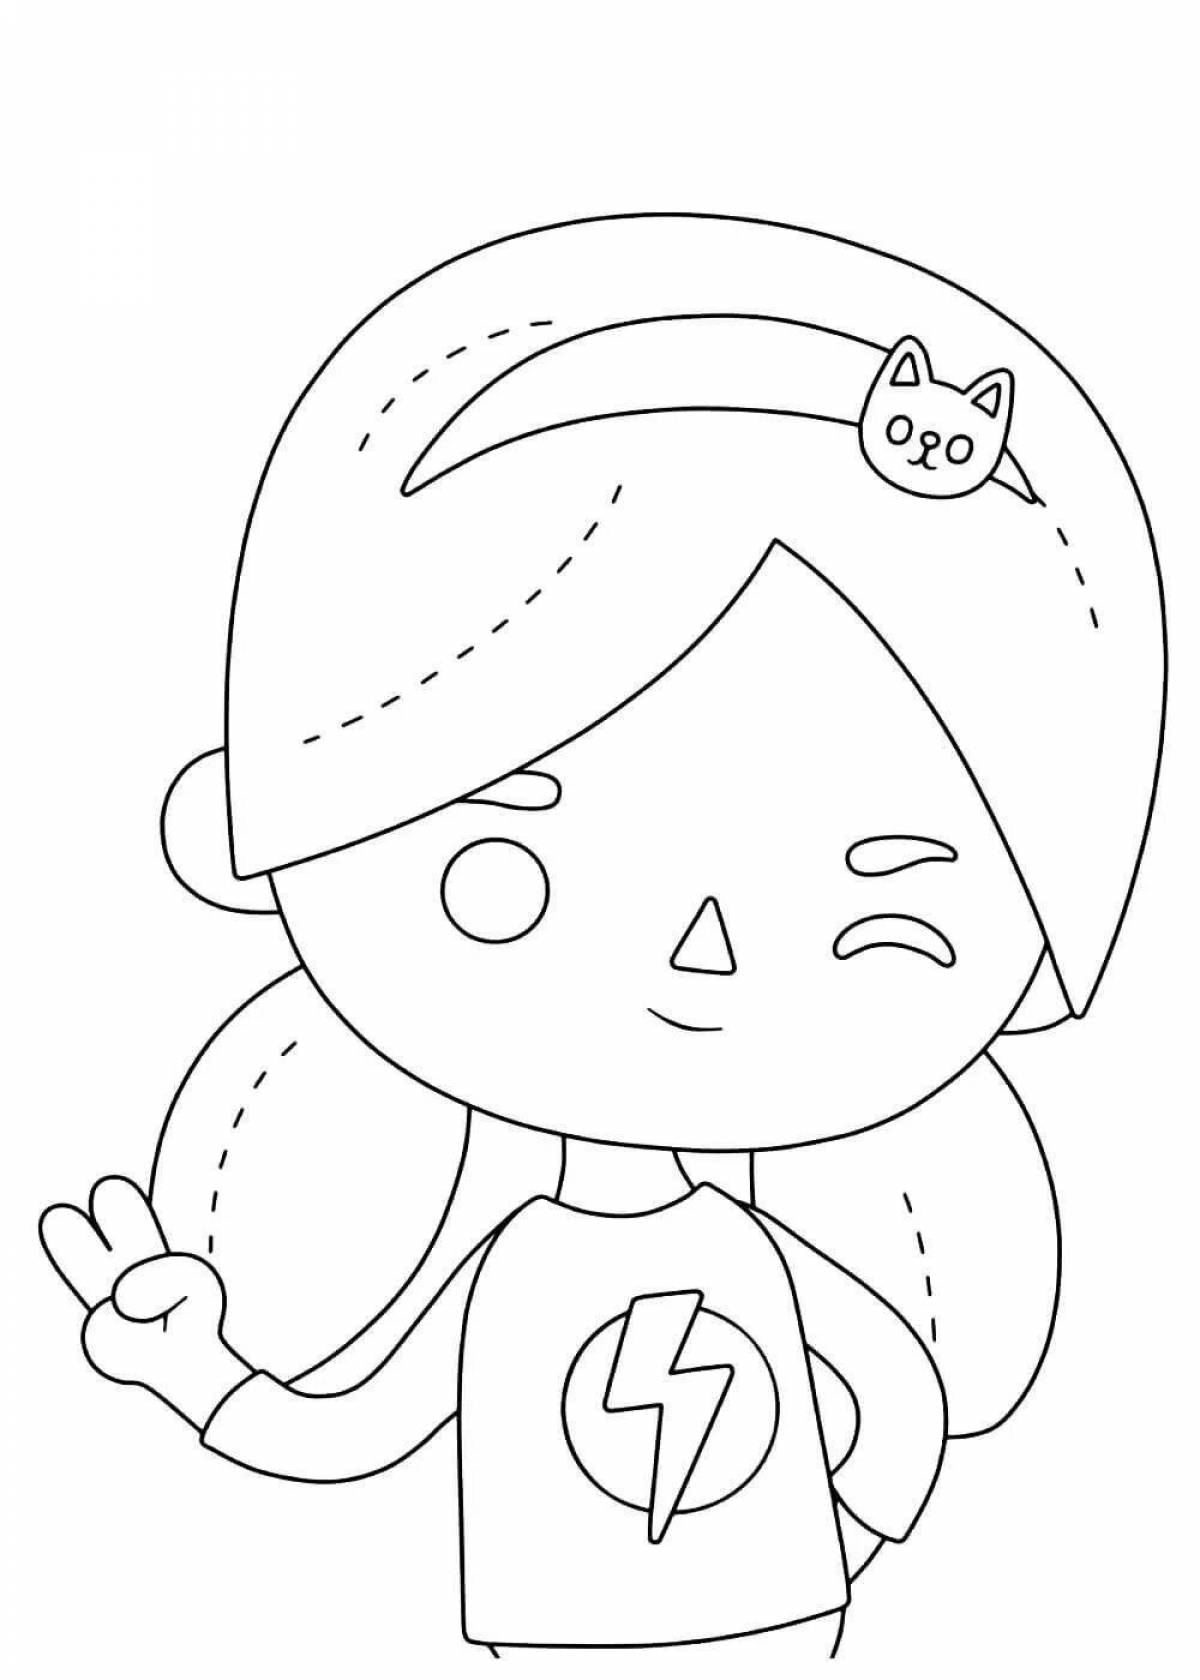 Adorable current side coloring page